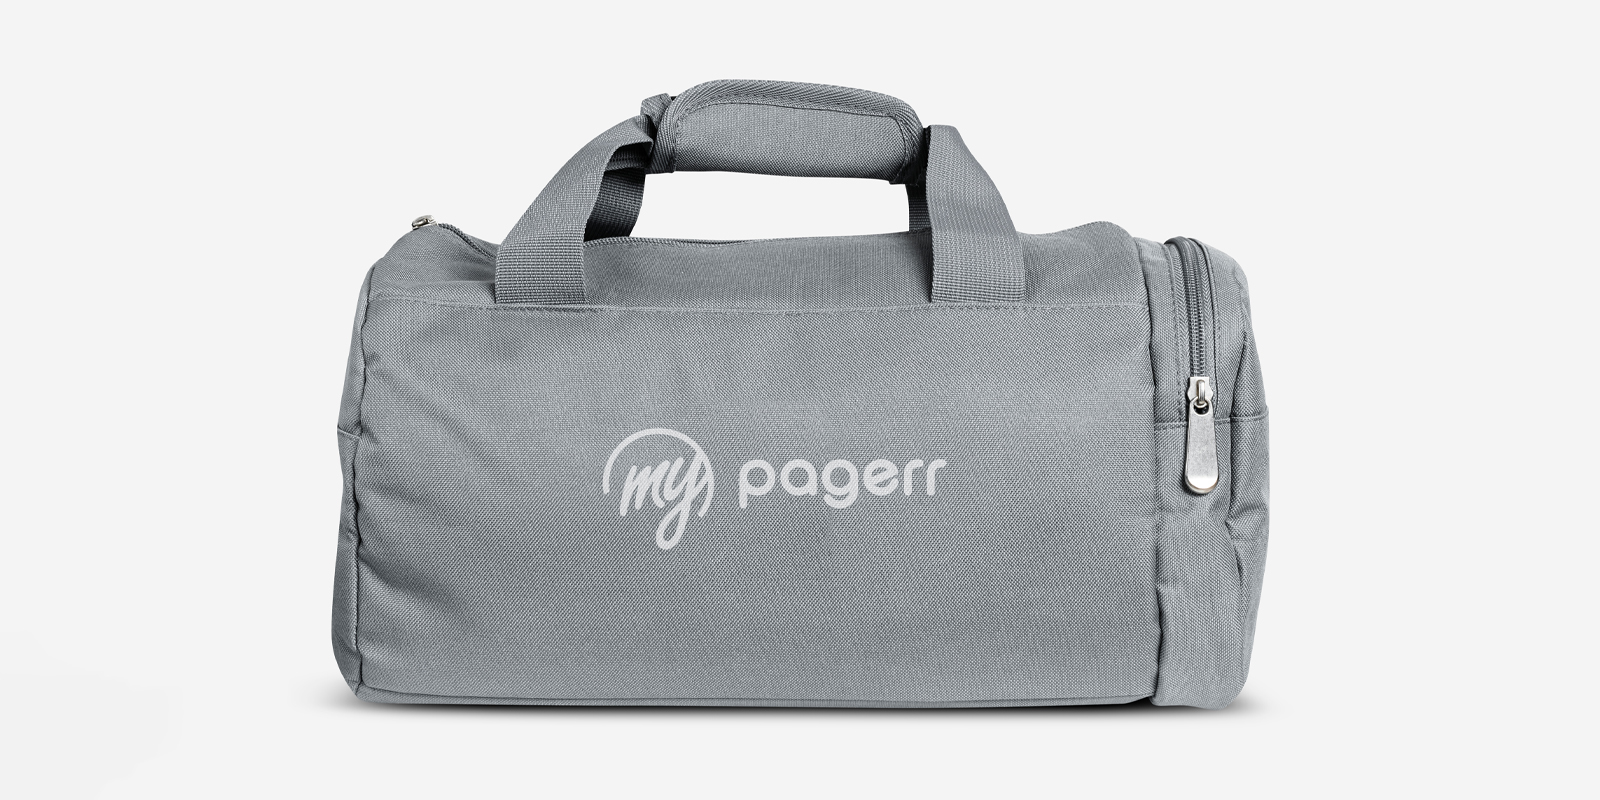 Duffel & gym bags in Perth - Print with Pagerr